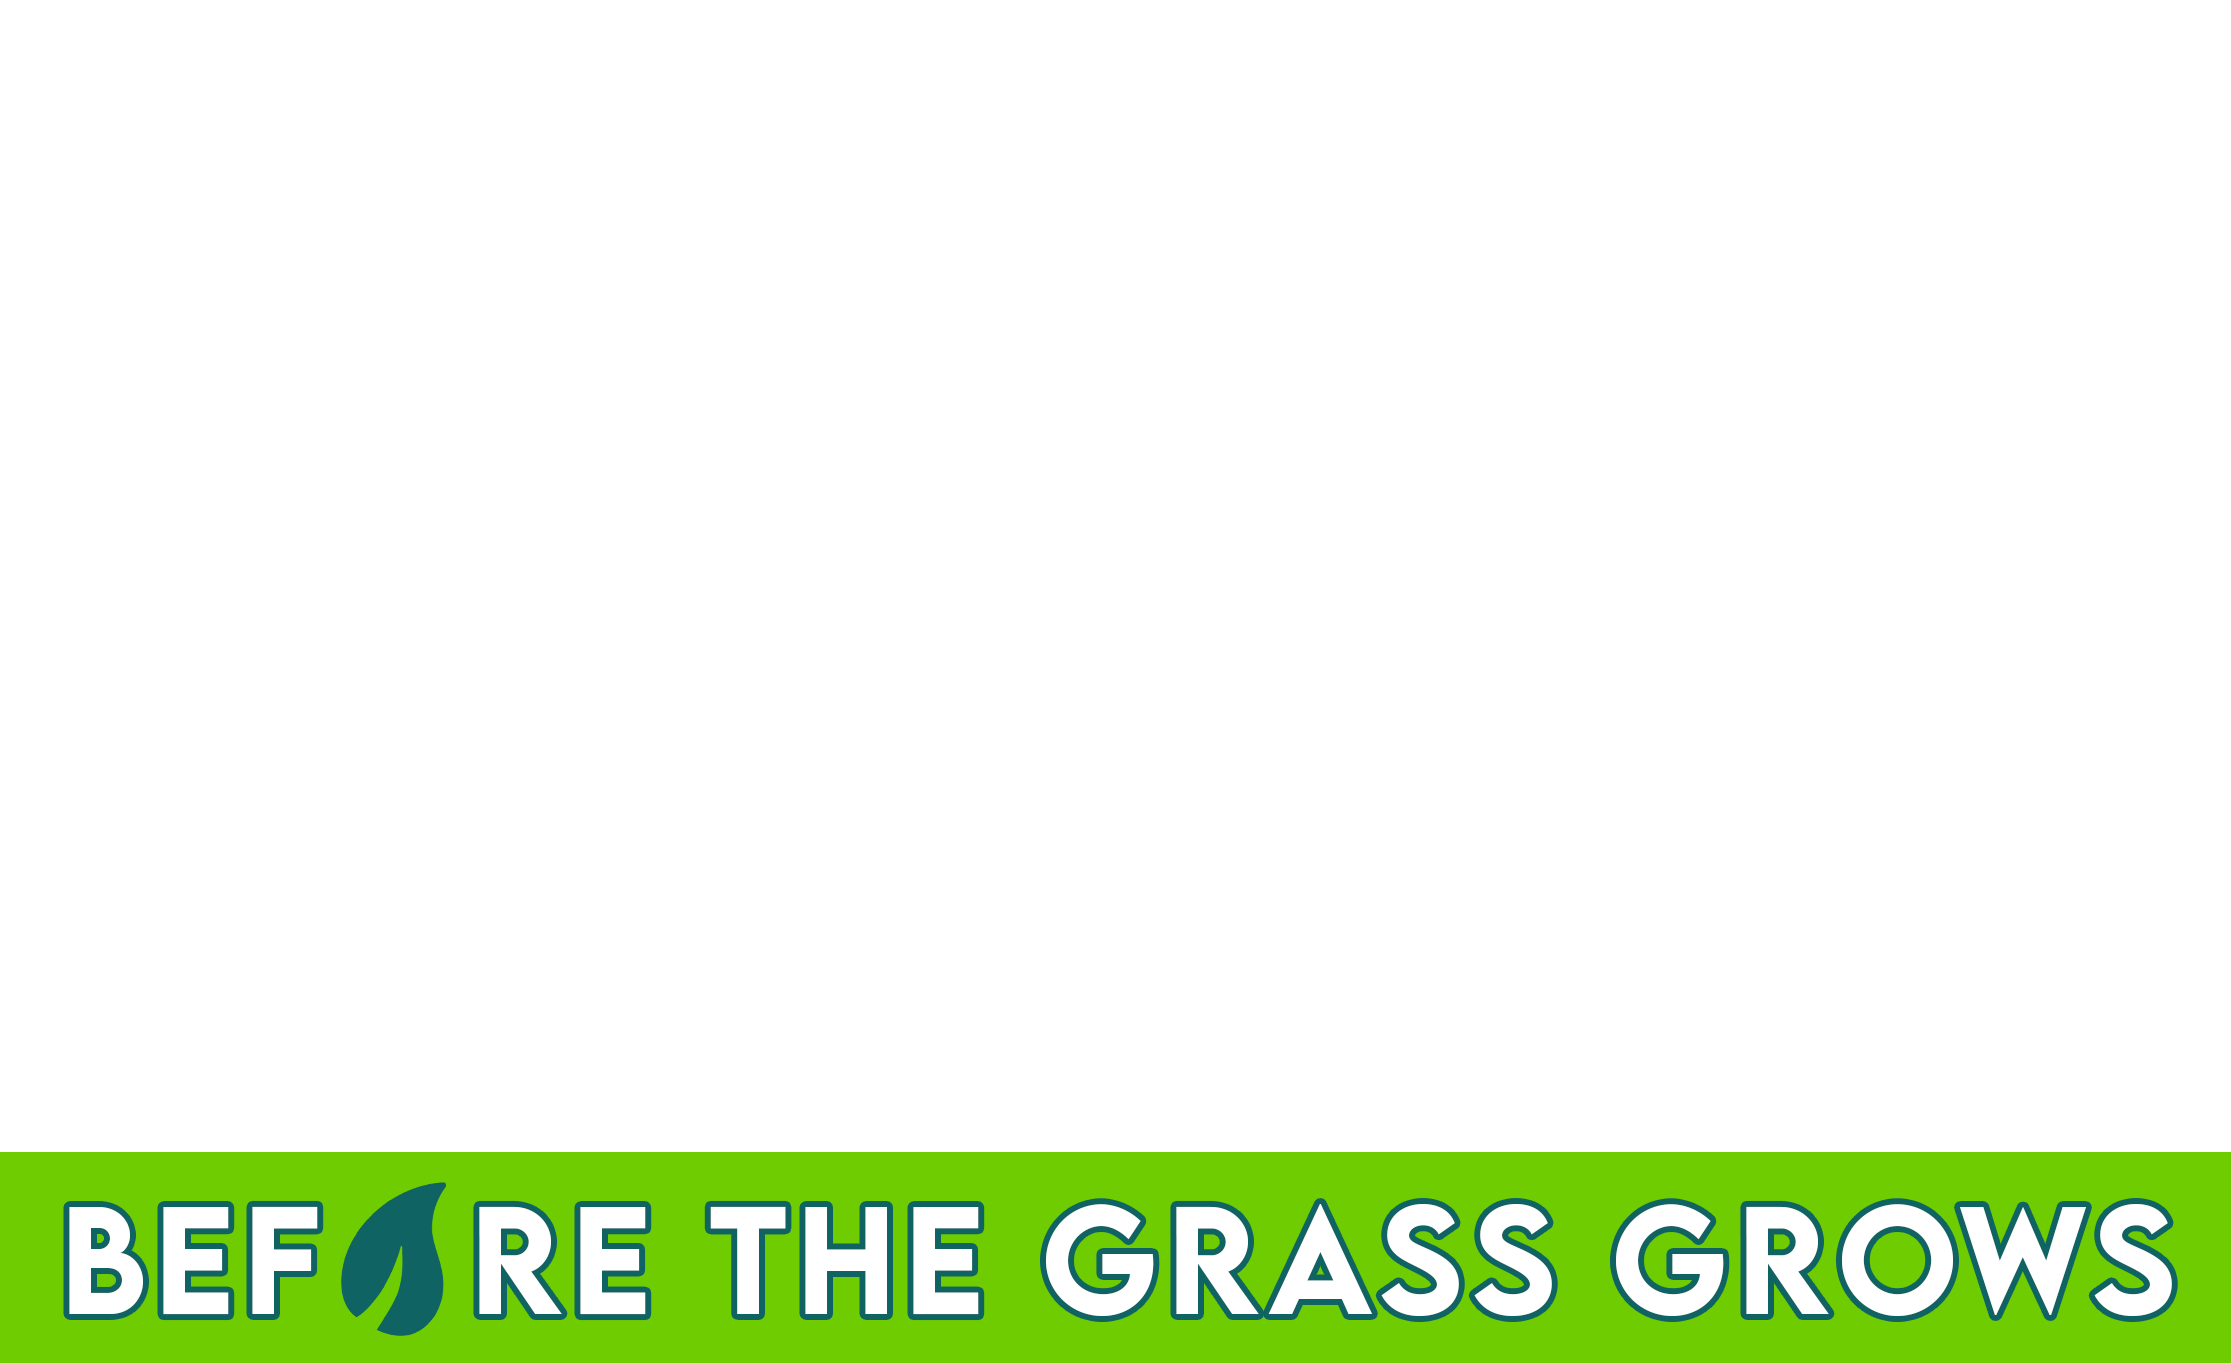 We Deliver Results... Before the Grass Grows